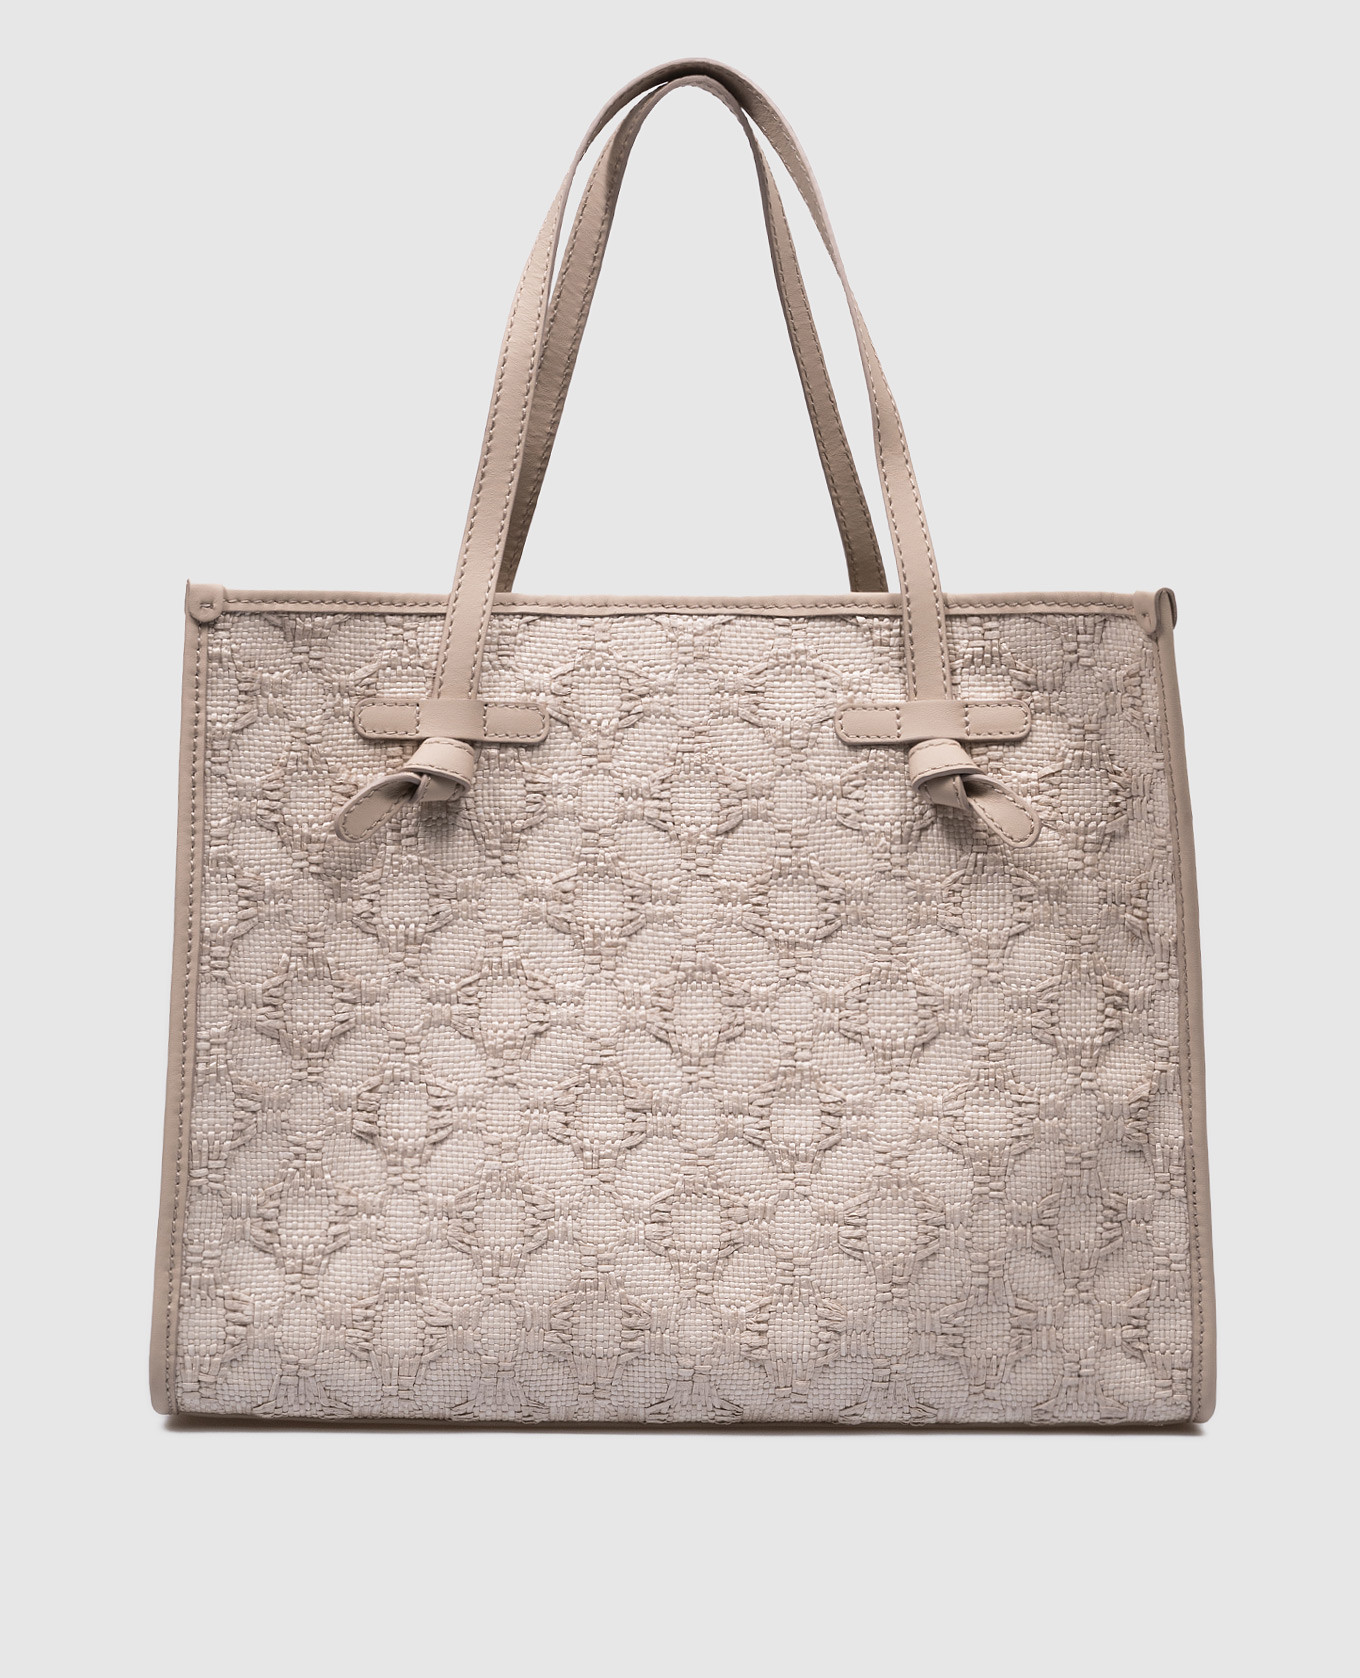 White Marcella tote bag with textured weave and patch